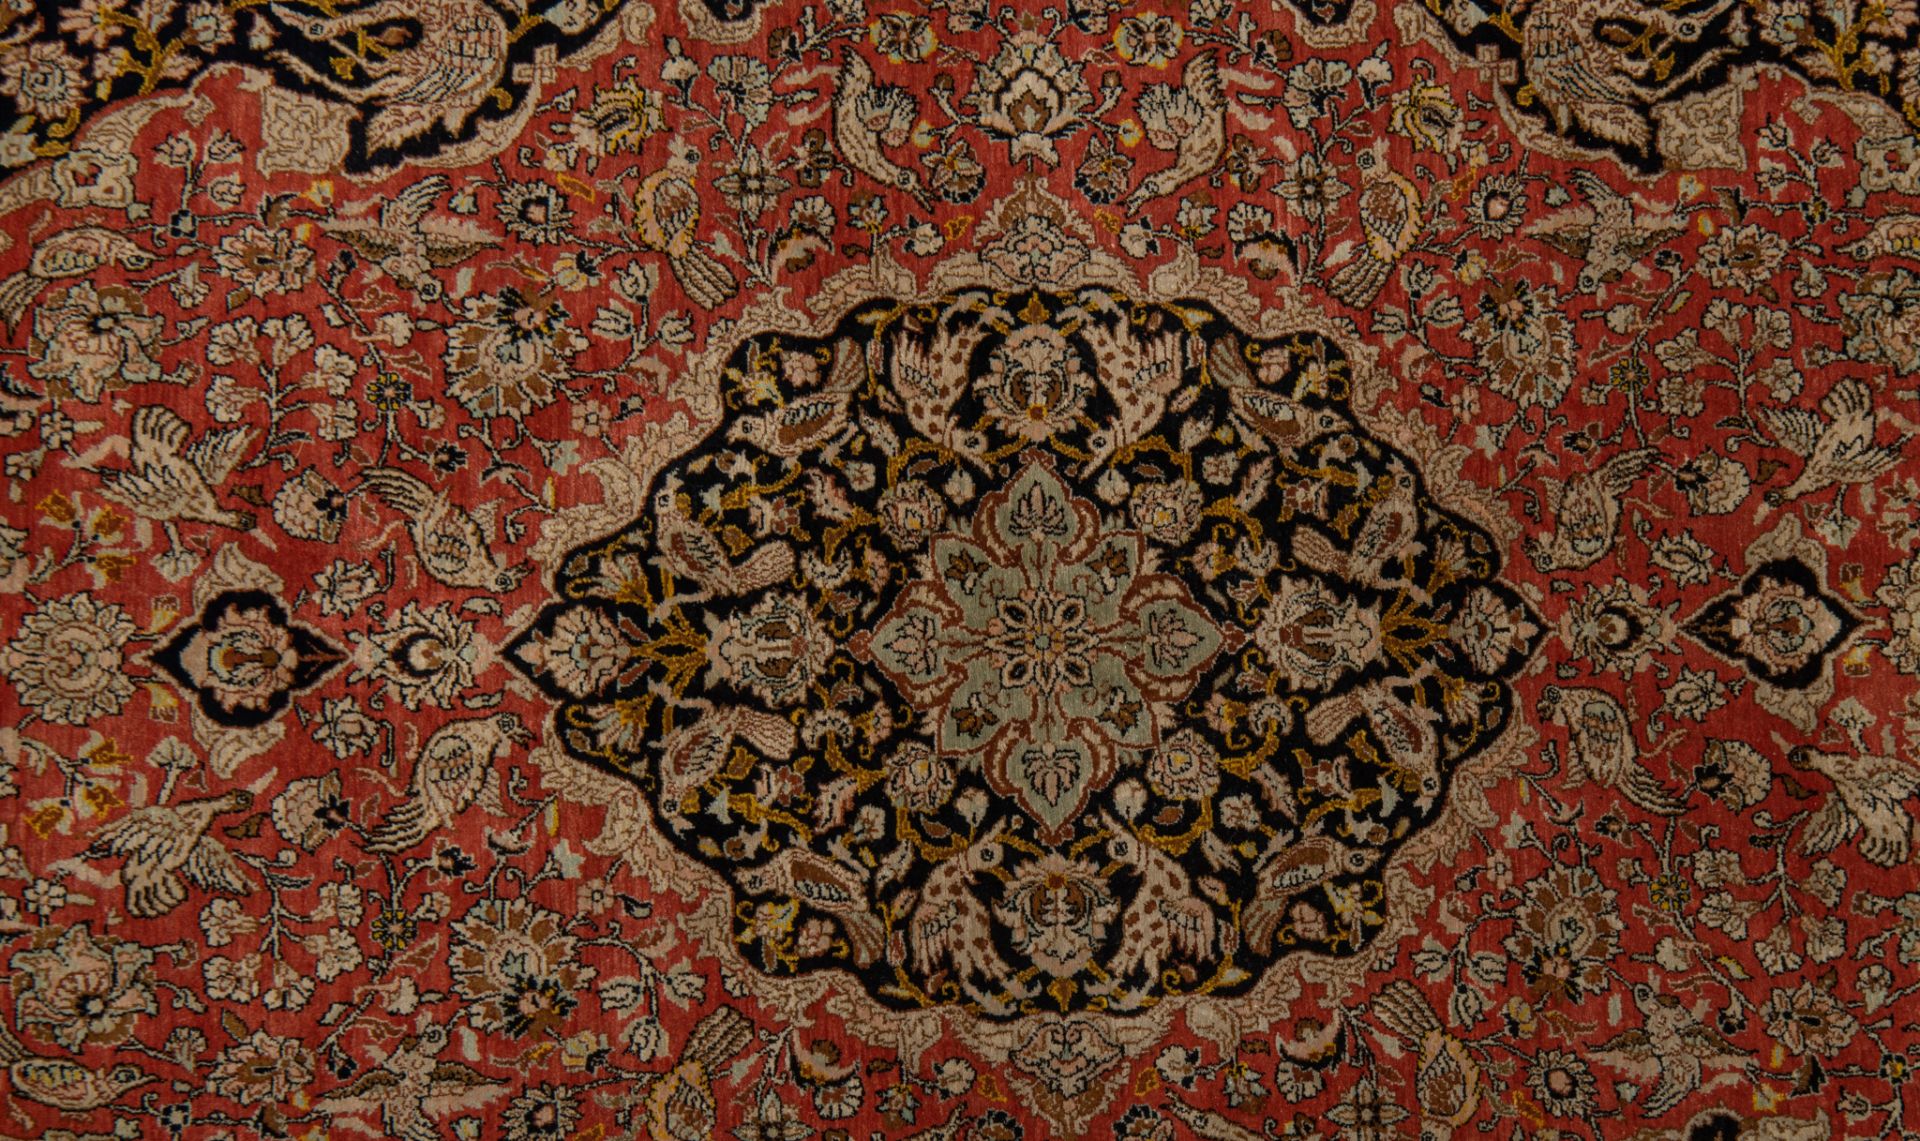 An Iran Ghoum carpet, floral decorated with birds, the borders with texts, silk, 137 x 216 cm - Image 4 of 6